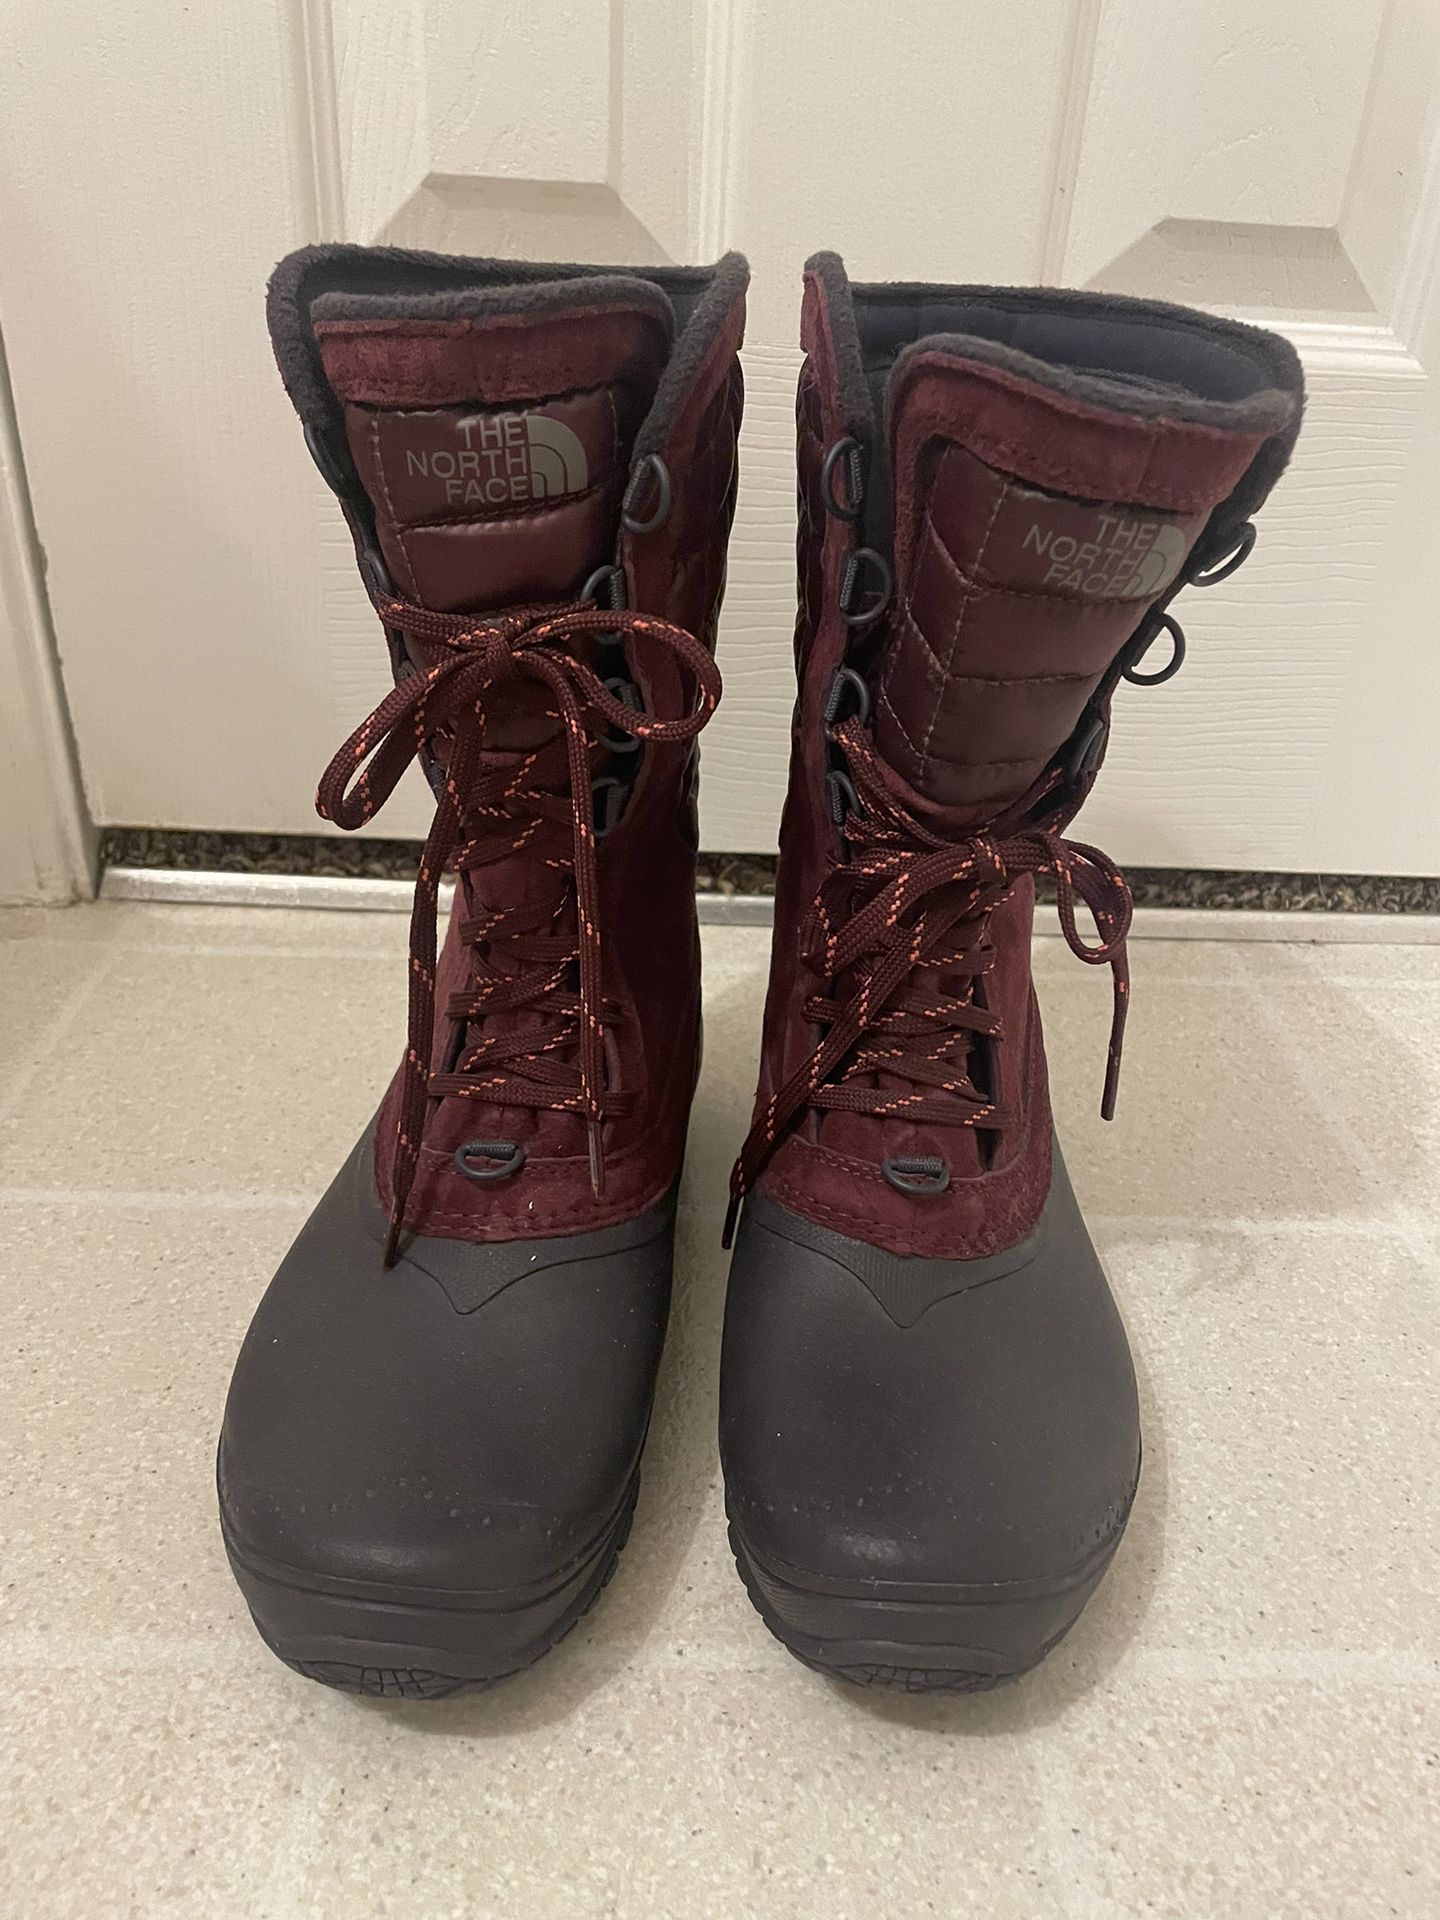 Women’s The North Face Snow boots